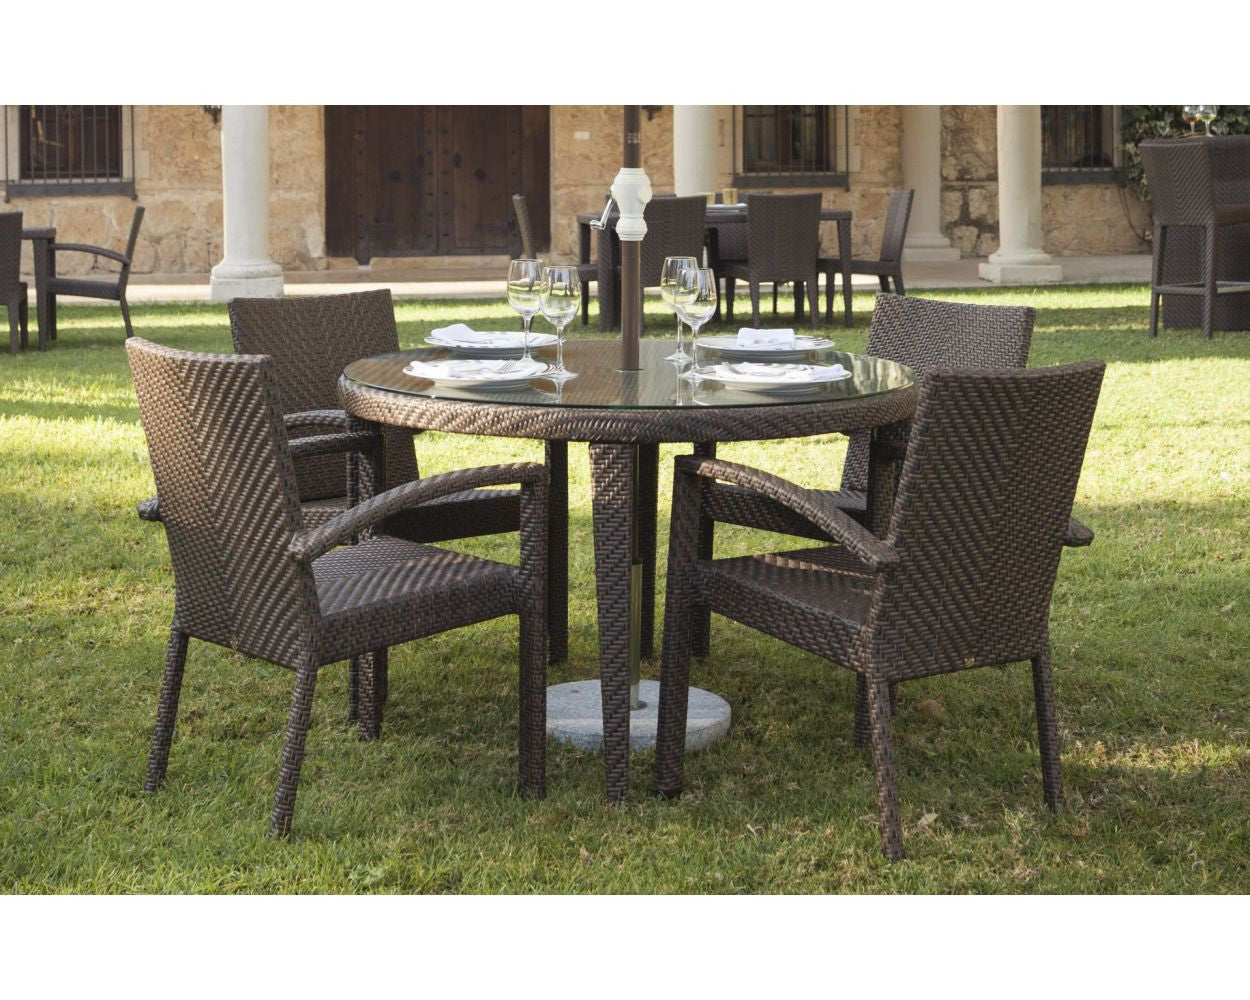 Hospitality Rattan Soho Woven Round 47" Table with Glass